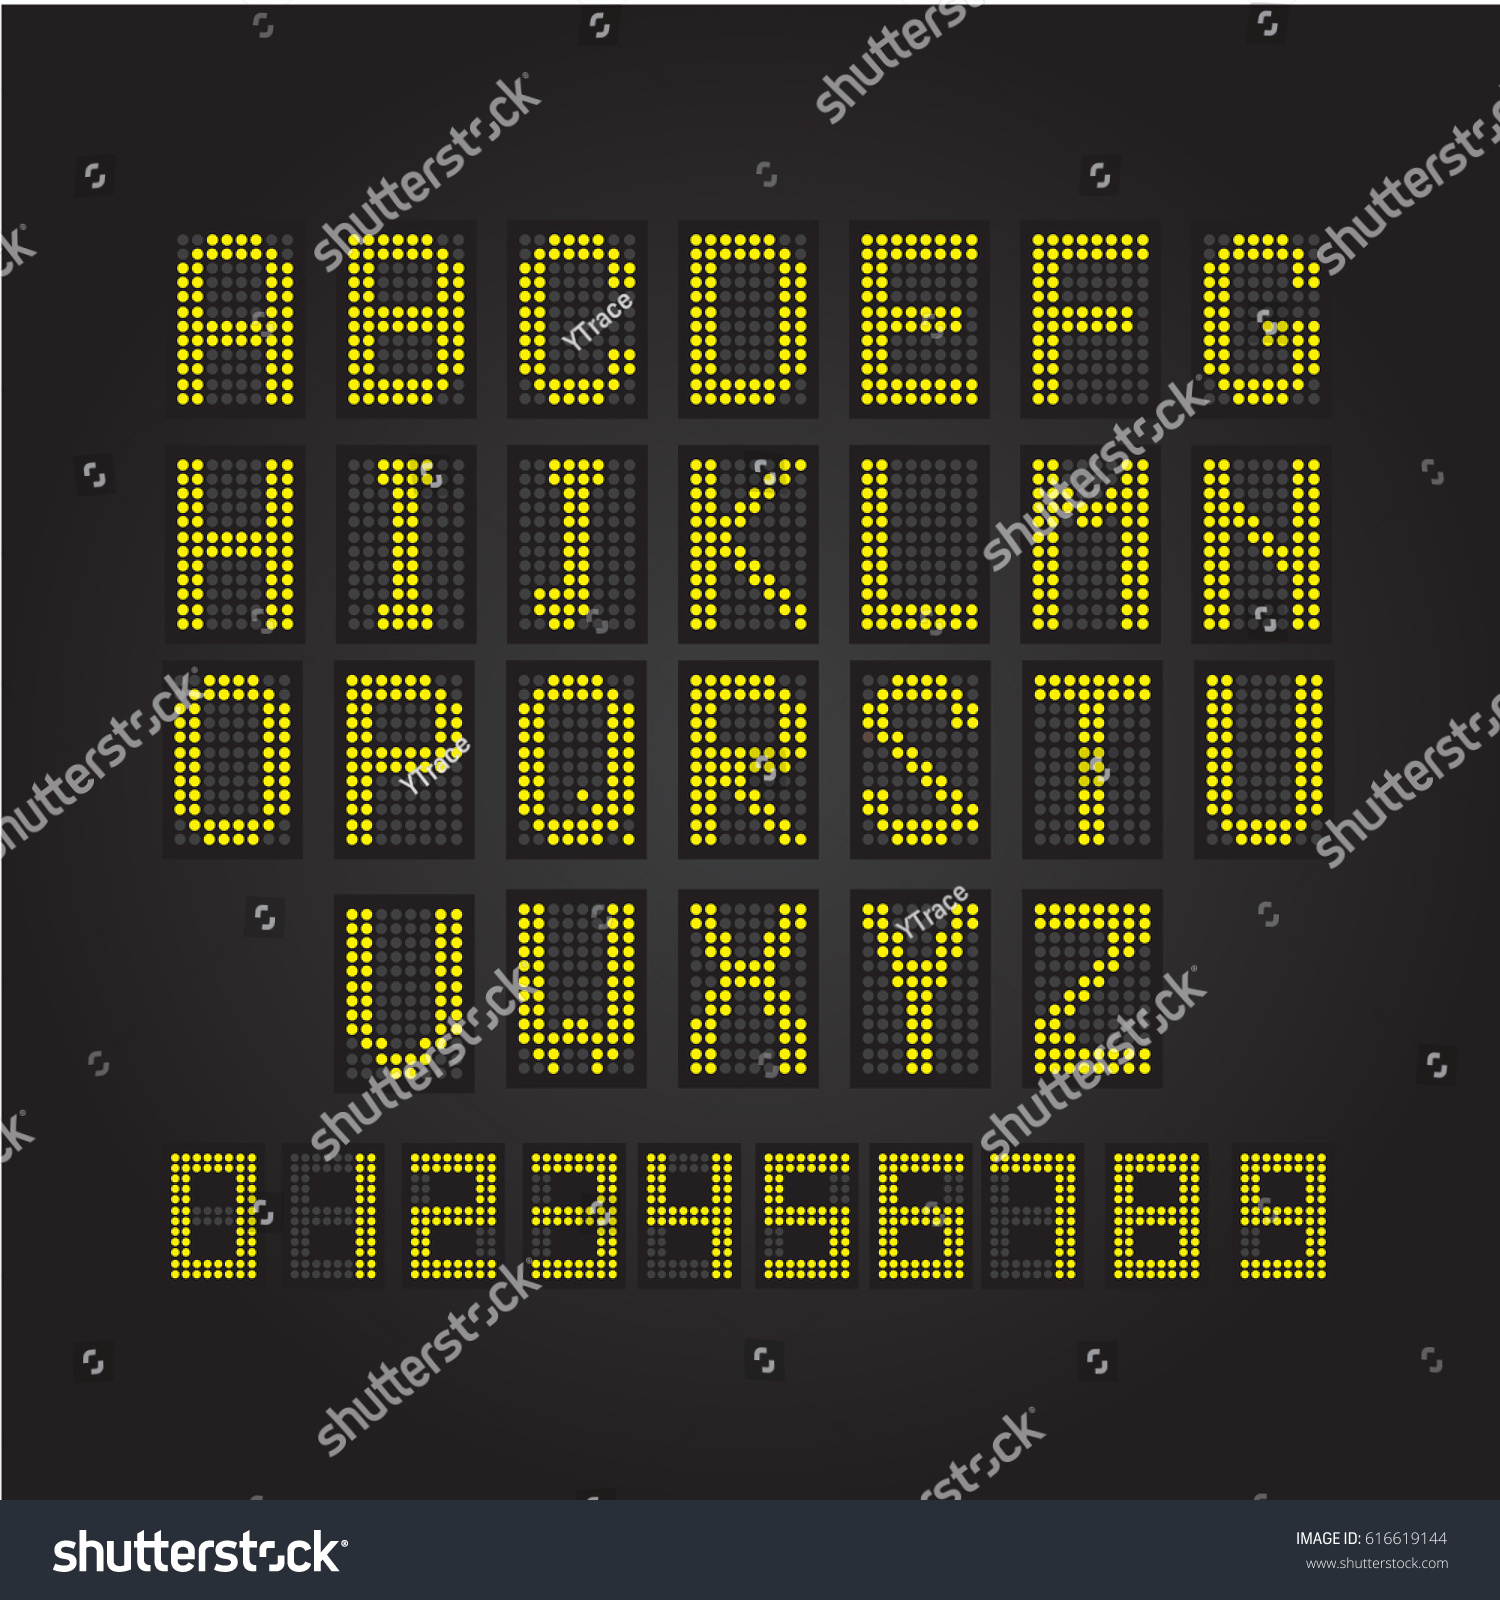 SVG of LED Scoreboard mechanical and electronic panel letters alphabets svg